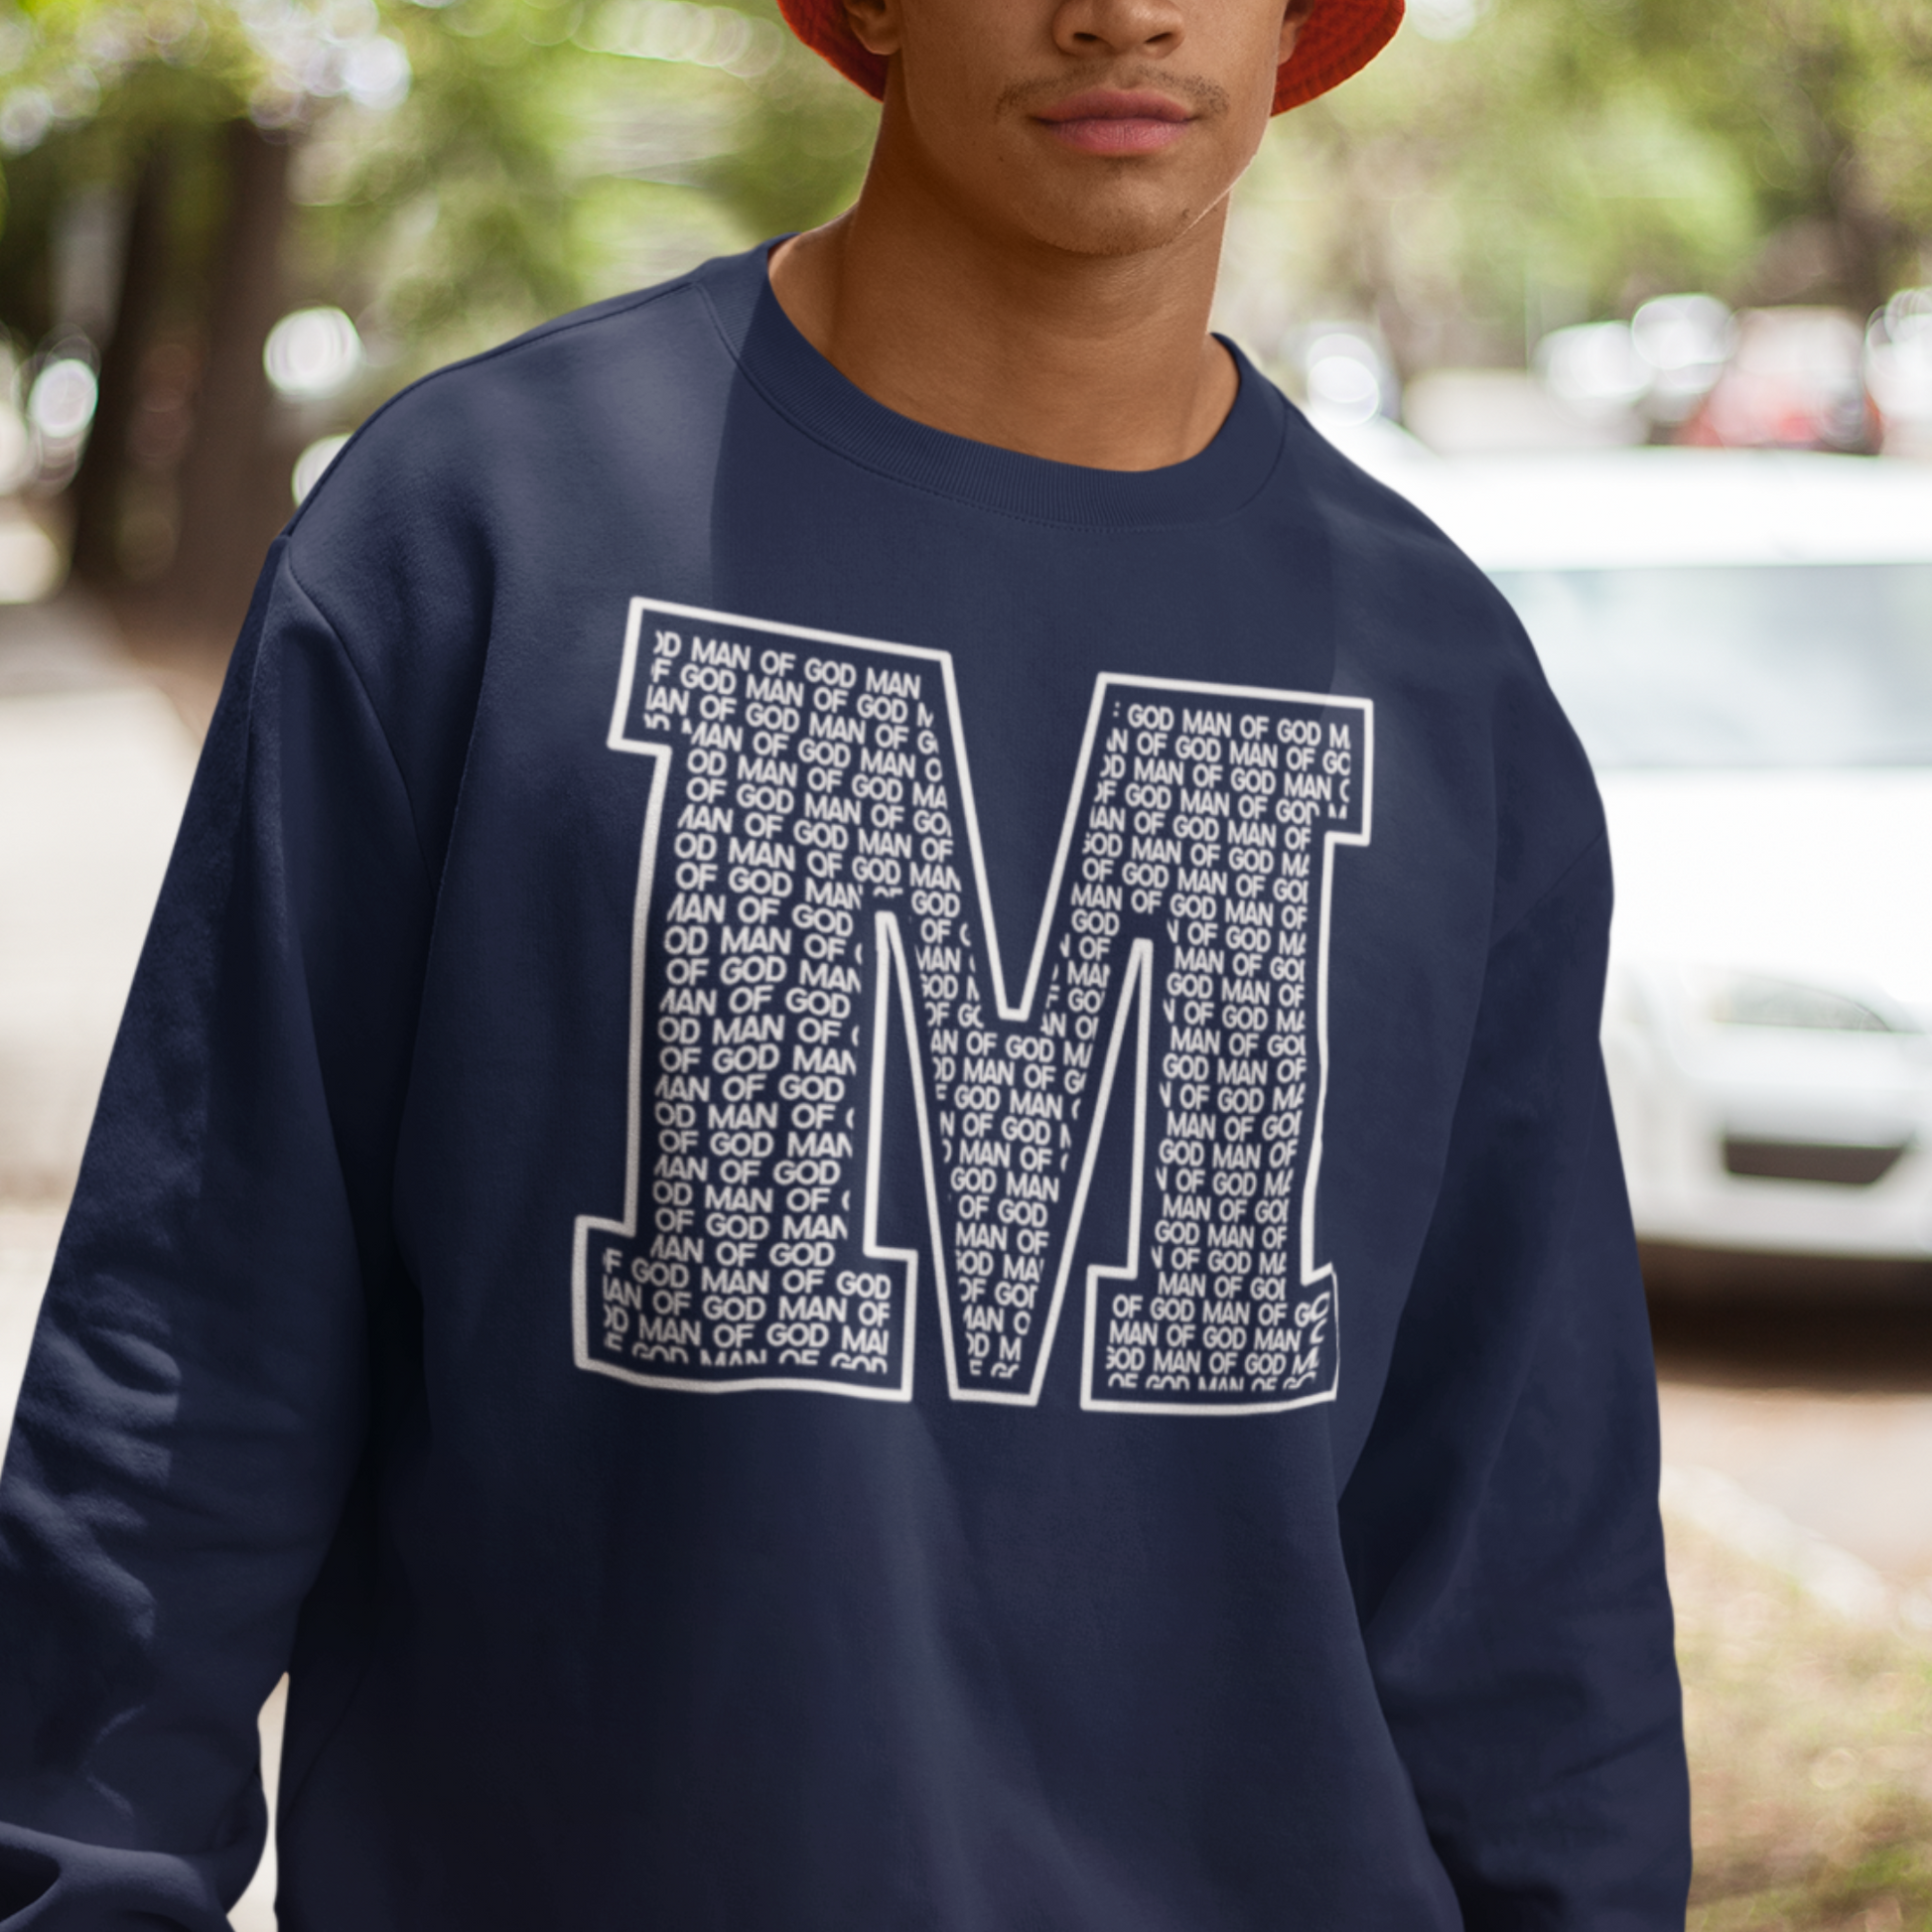 Shop for our Man of God Navy Blue Letterman Sweatshirt. Our Christian apparel is soft, comfortable, and great for everyday wear. Declare your faith and show confidence in Jesus when you wear this Christian sweatshirt.